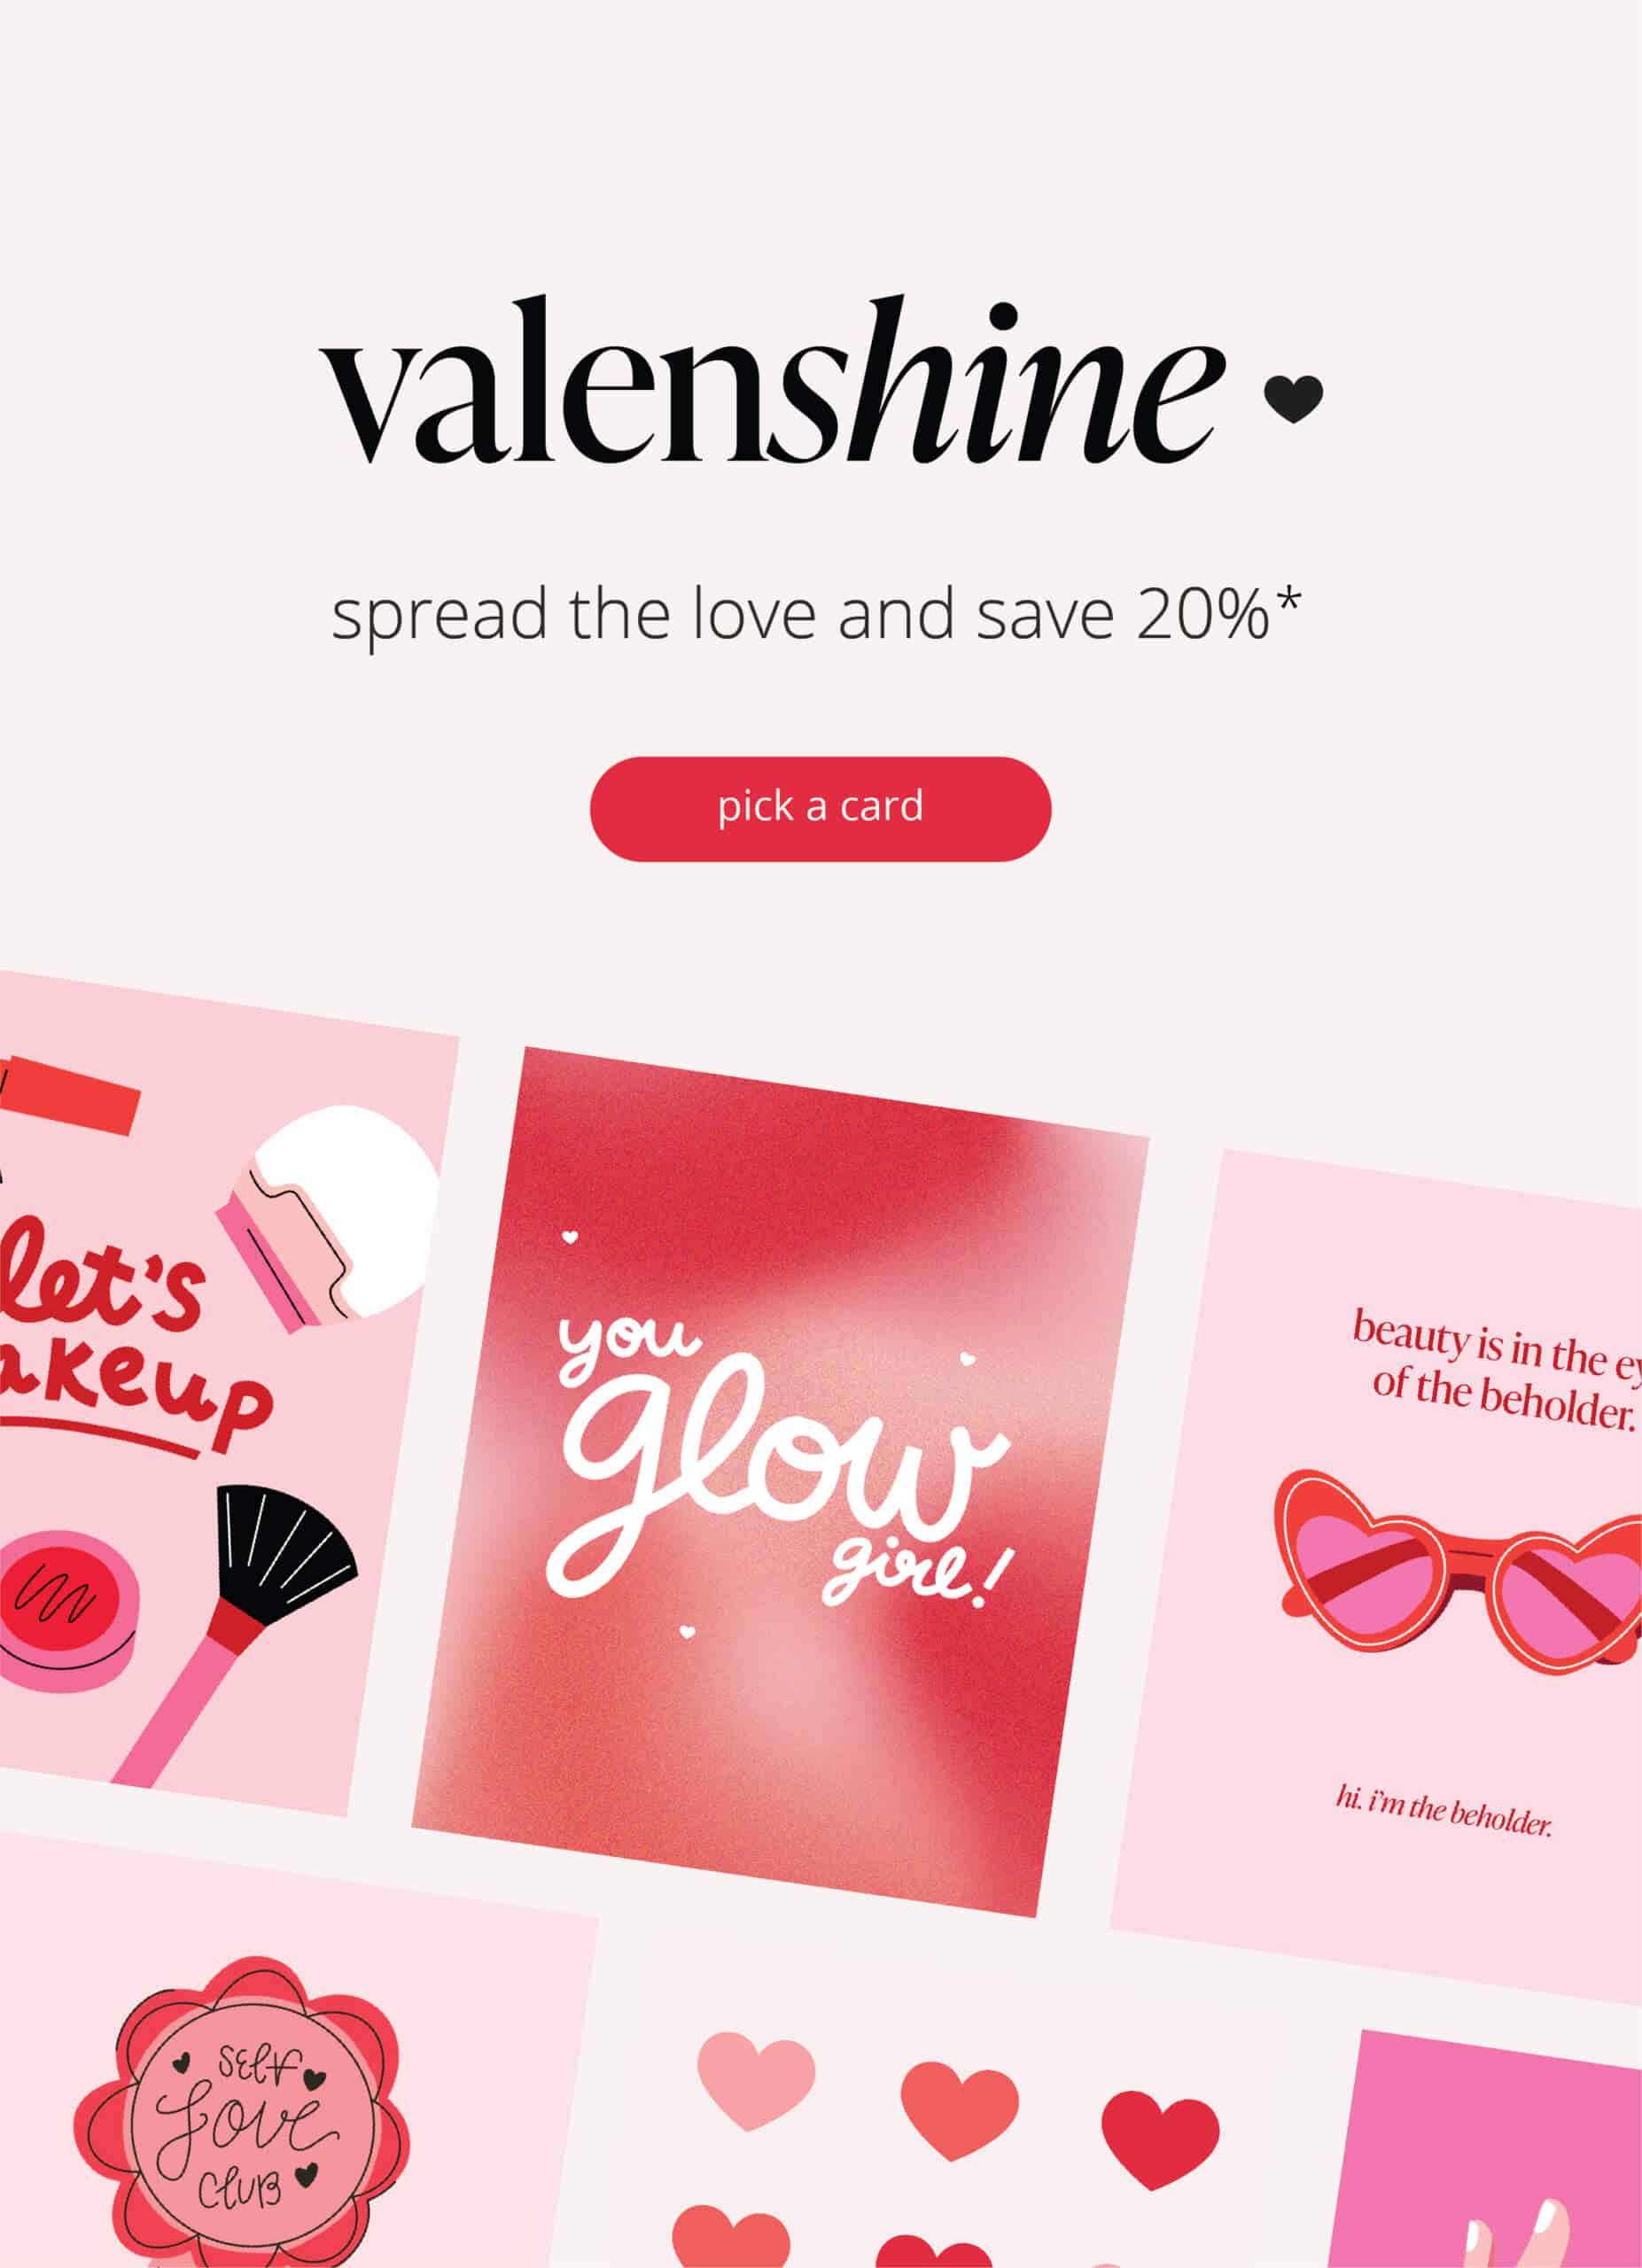 Spread the love and save 20%*